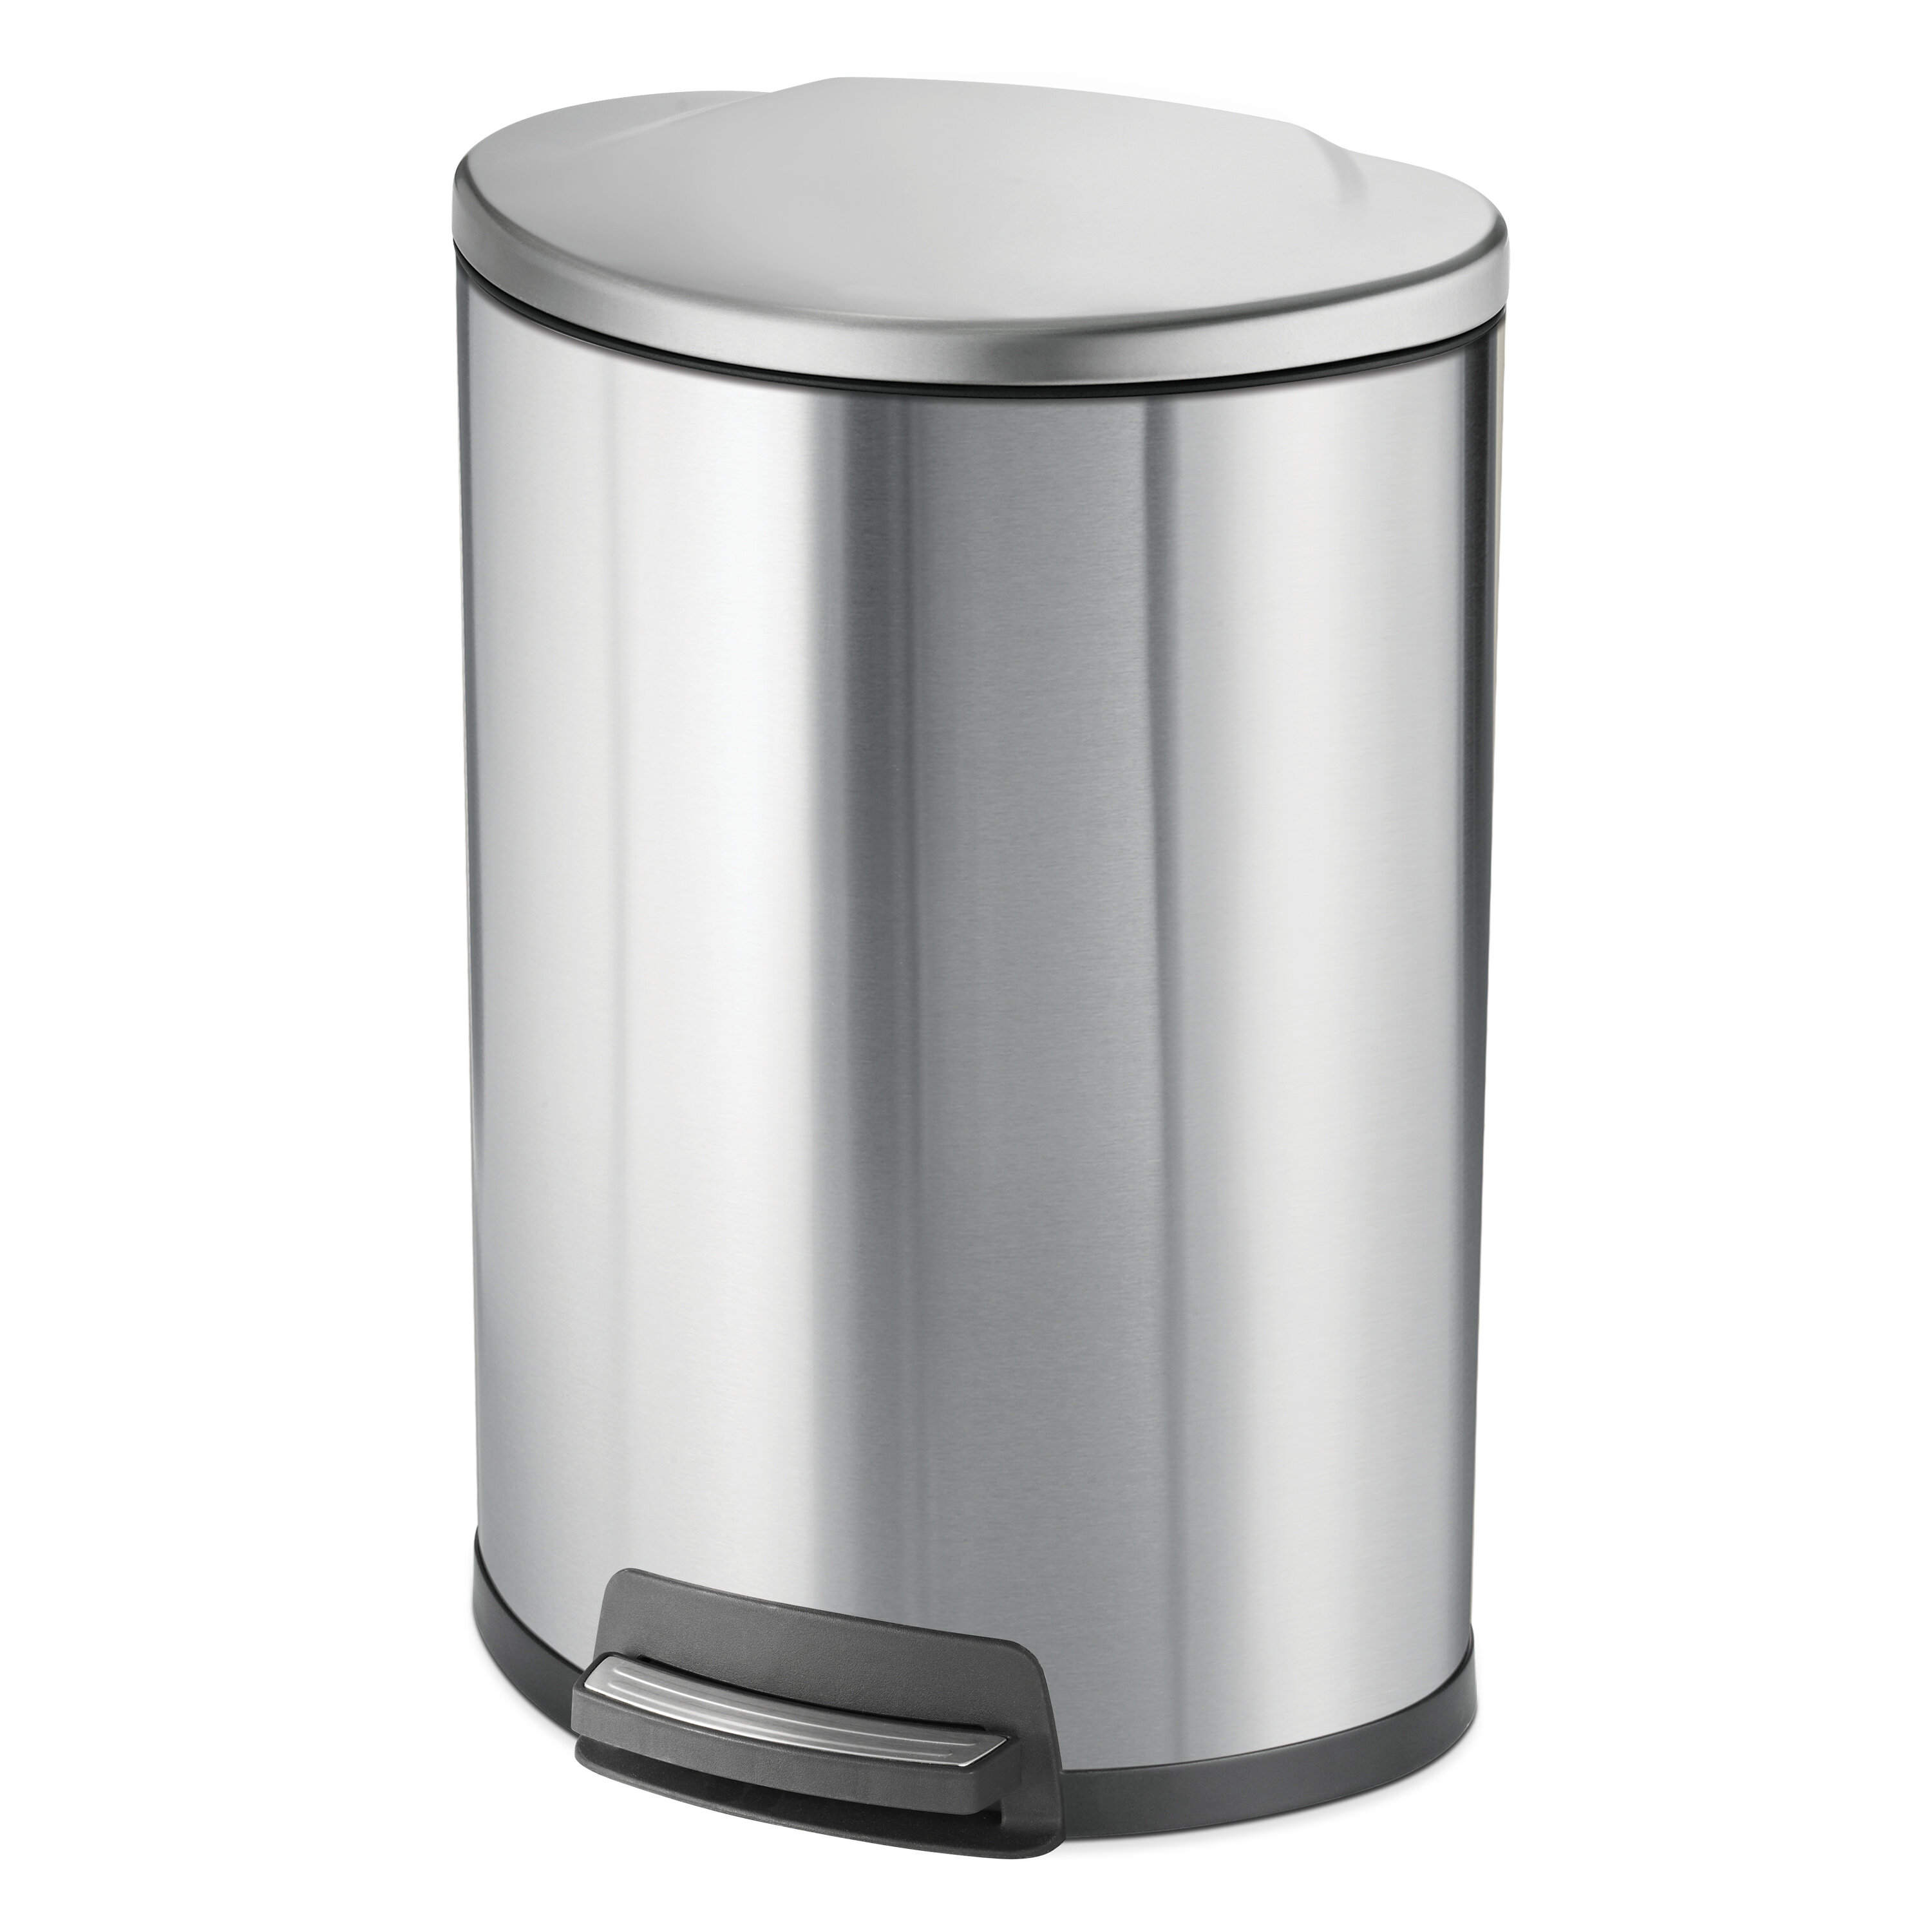 Tramontina Stainless Steel Step Trash Can 13 Gallon Silver